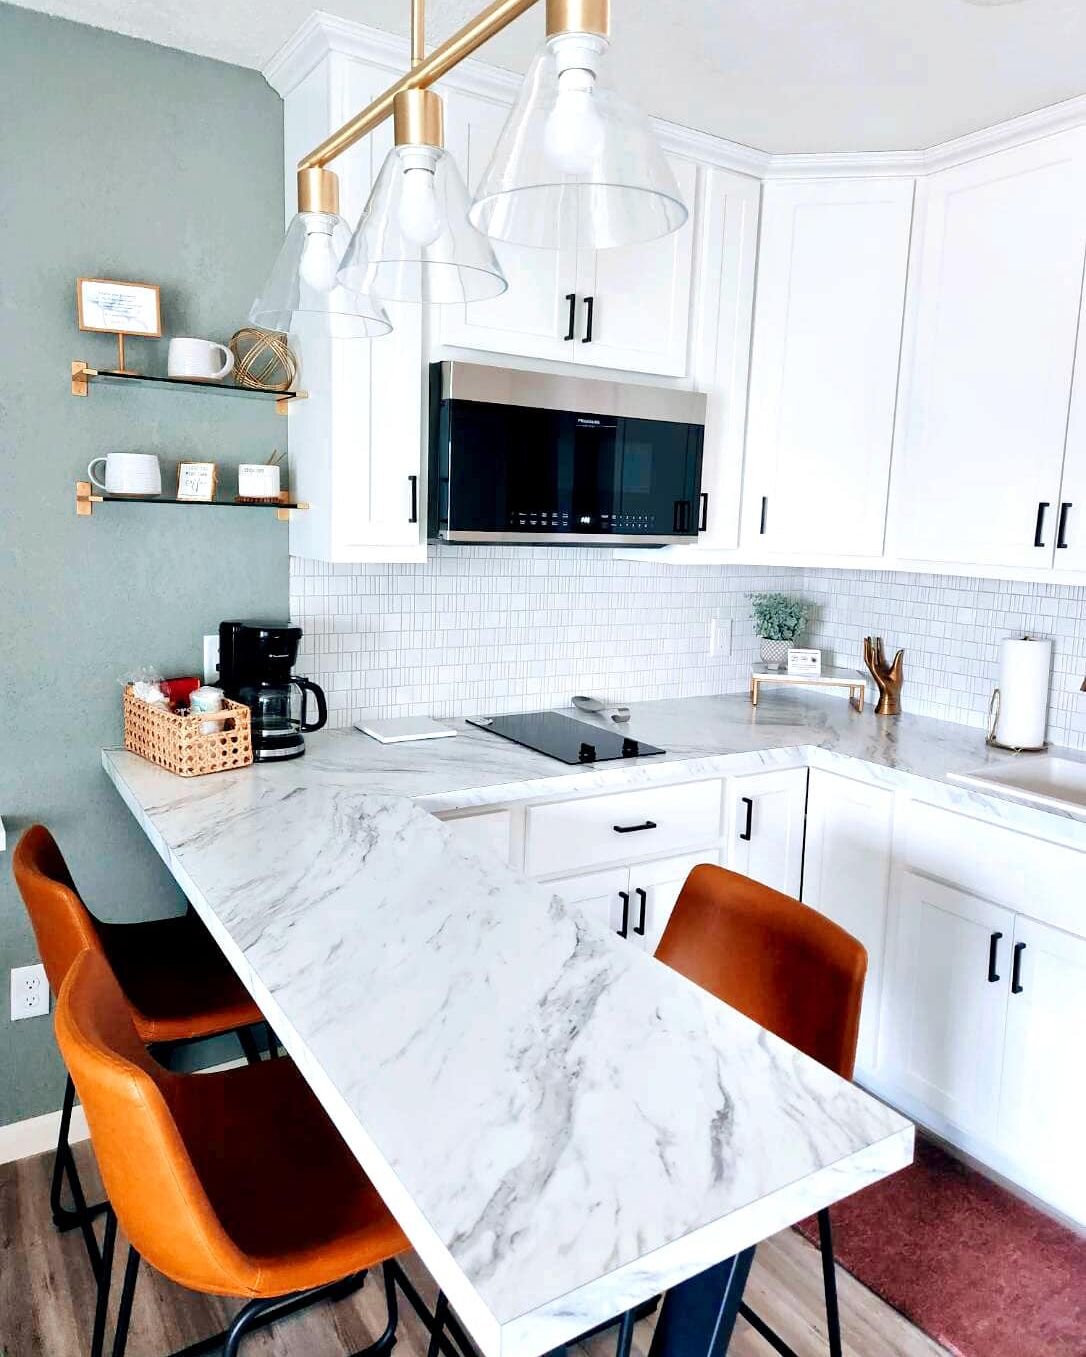 Us when we see a final project come together 🤩✨😍
We love how the @hotel_riverbank_henry incorporated Calcutta Marble Laminate Countertops to spice up their room renovation.
.
.
.
#cictops #hotelriverbankhenryil #hotelriverbankhenry #smallbusiness #